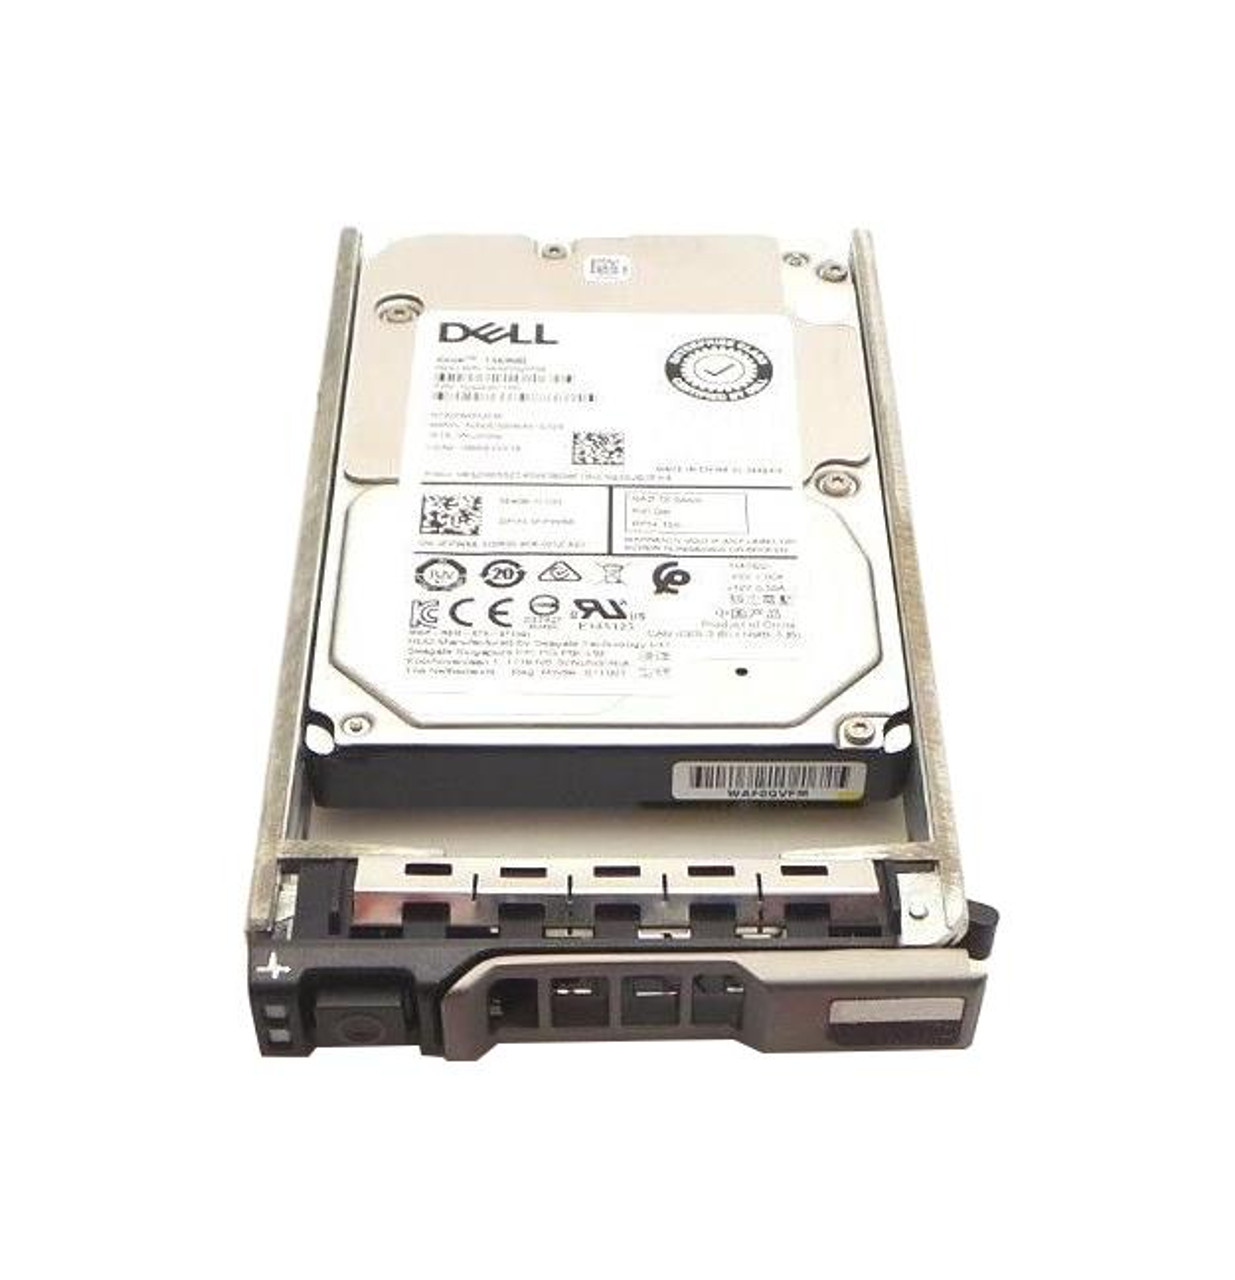 400-AJRD Dell 300GB 15000RPM SAS 12Gbps Dual Port 2.5-inch Internal Hard Drive with Tray